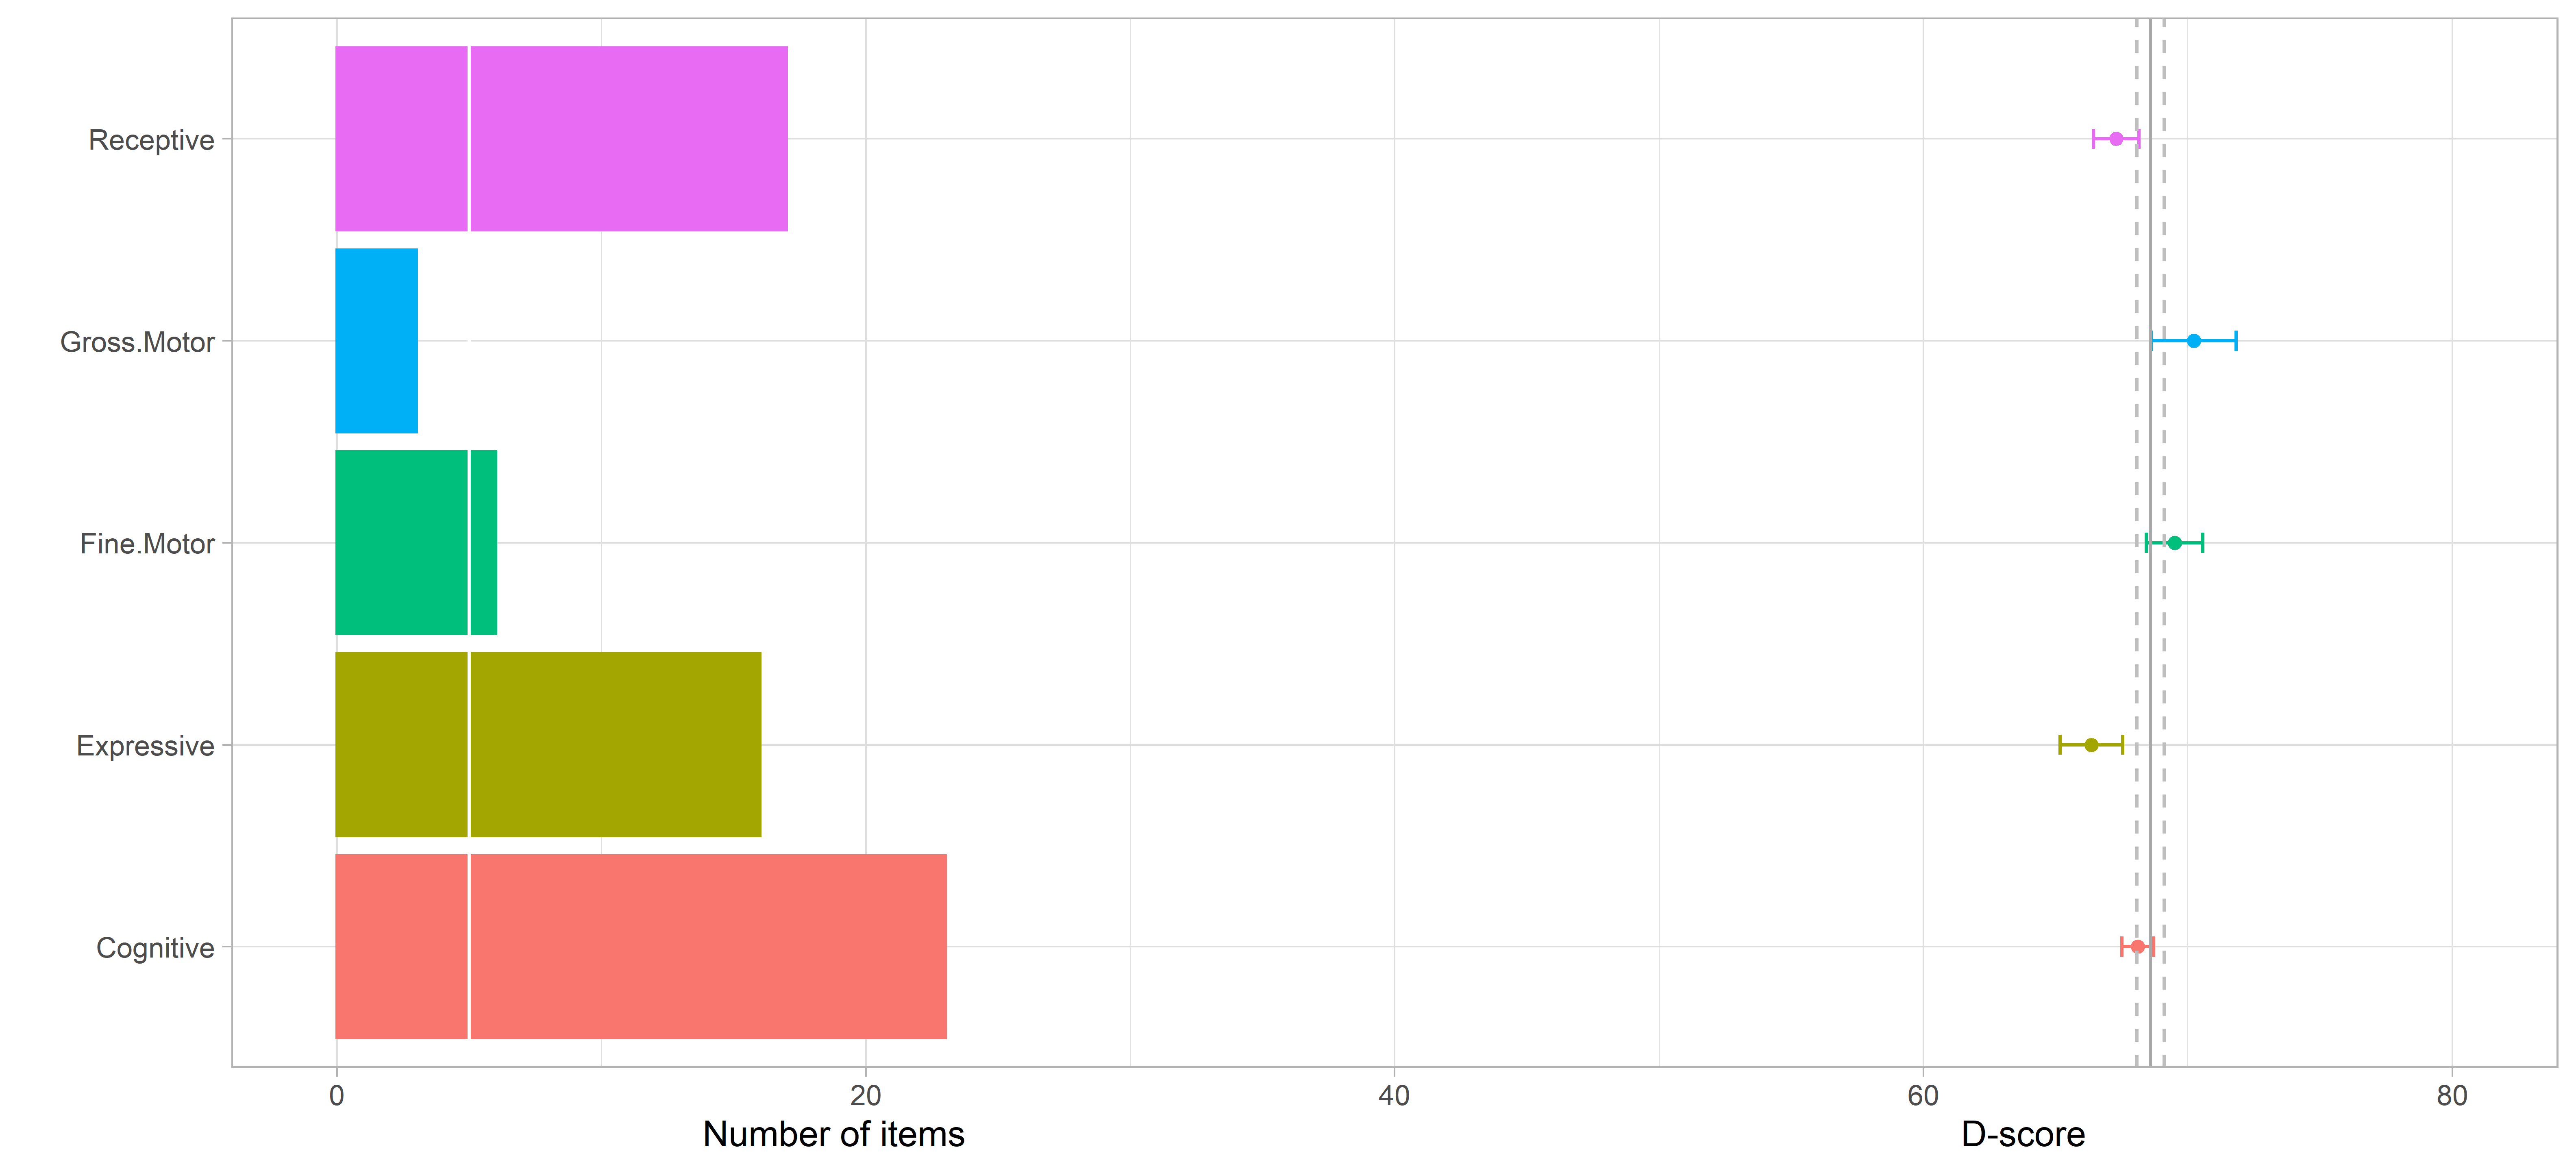 Domain-specific D-scores for a 3 year old boy.